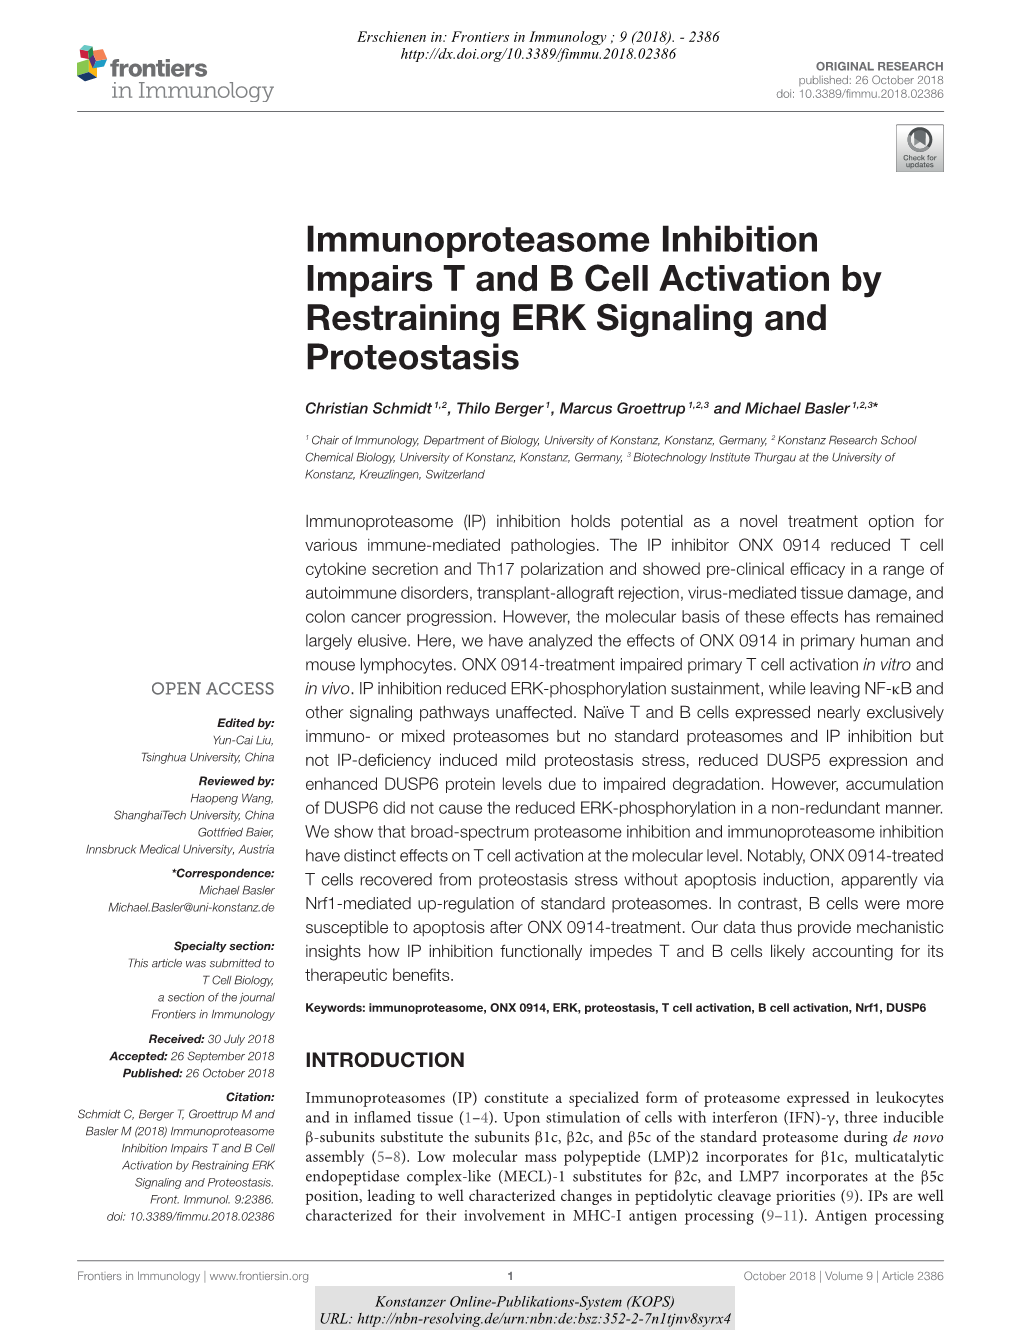 Immunoproteasome Inhibition Impairs T and B Cell Activation by Restraining ERK Signaling and Proteostasis